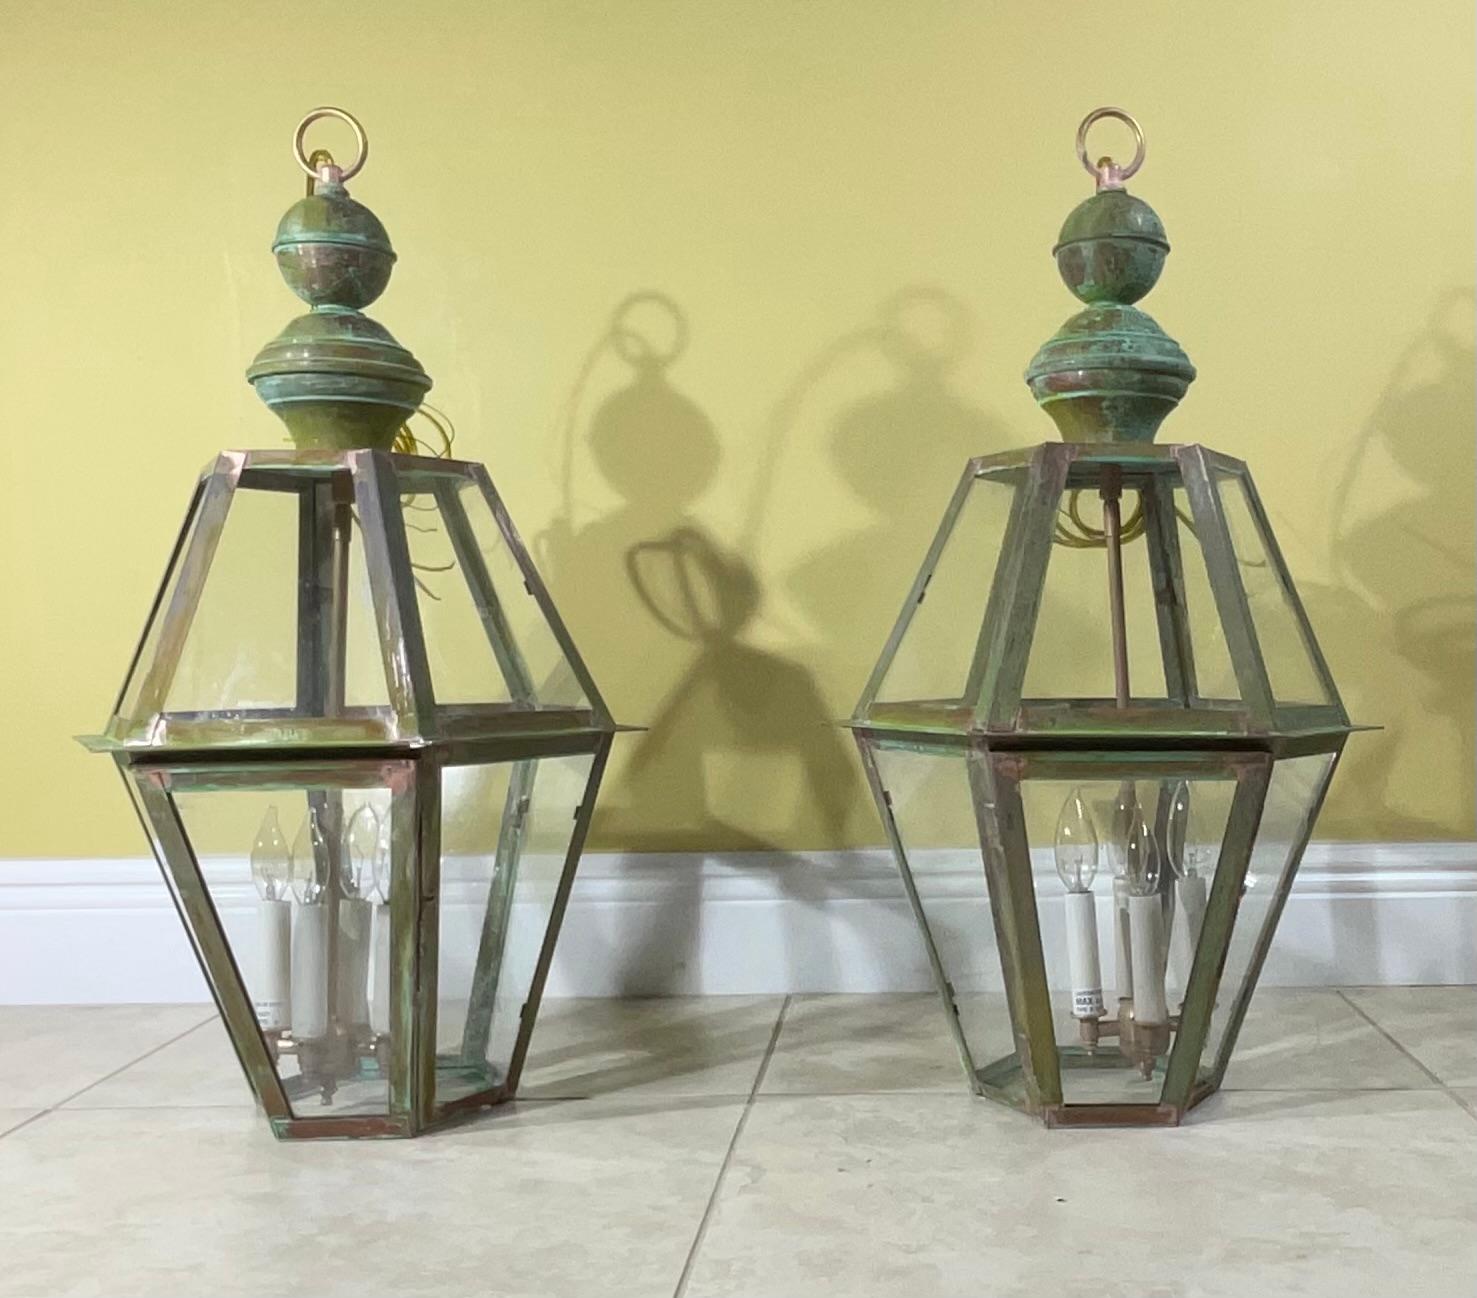 Pair Of Six Sides Solid Copper And Brass Handcrafted Hanging Lanterns For Sale 4